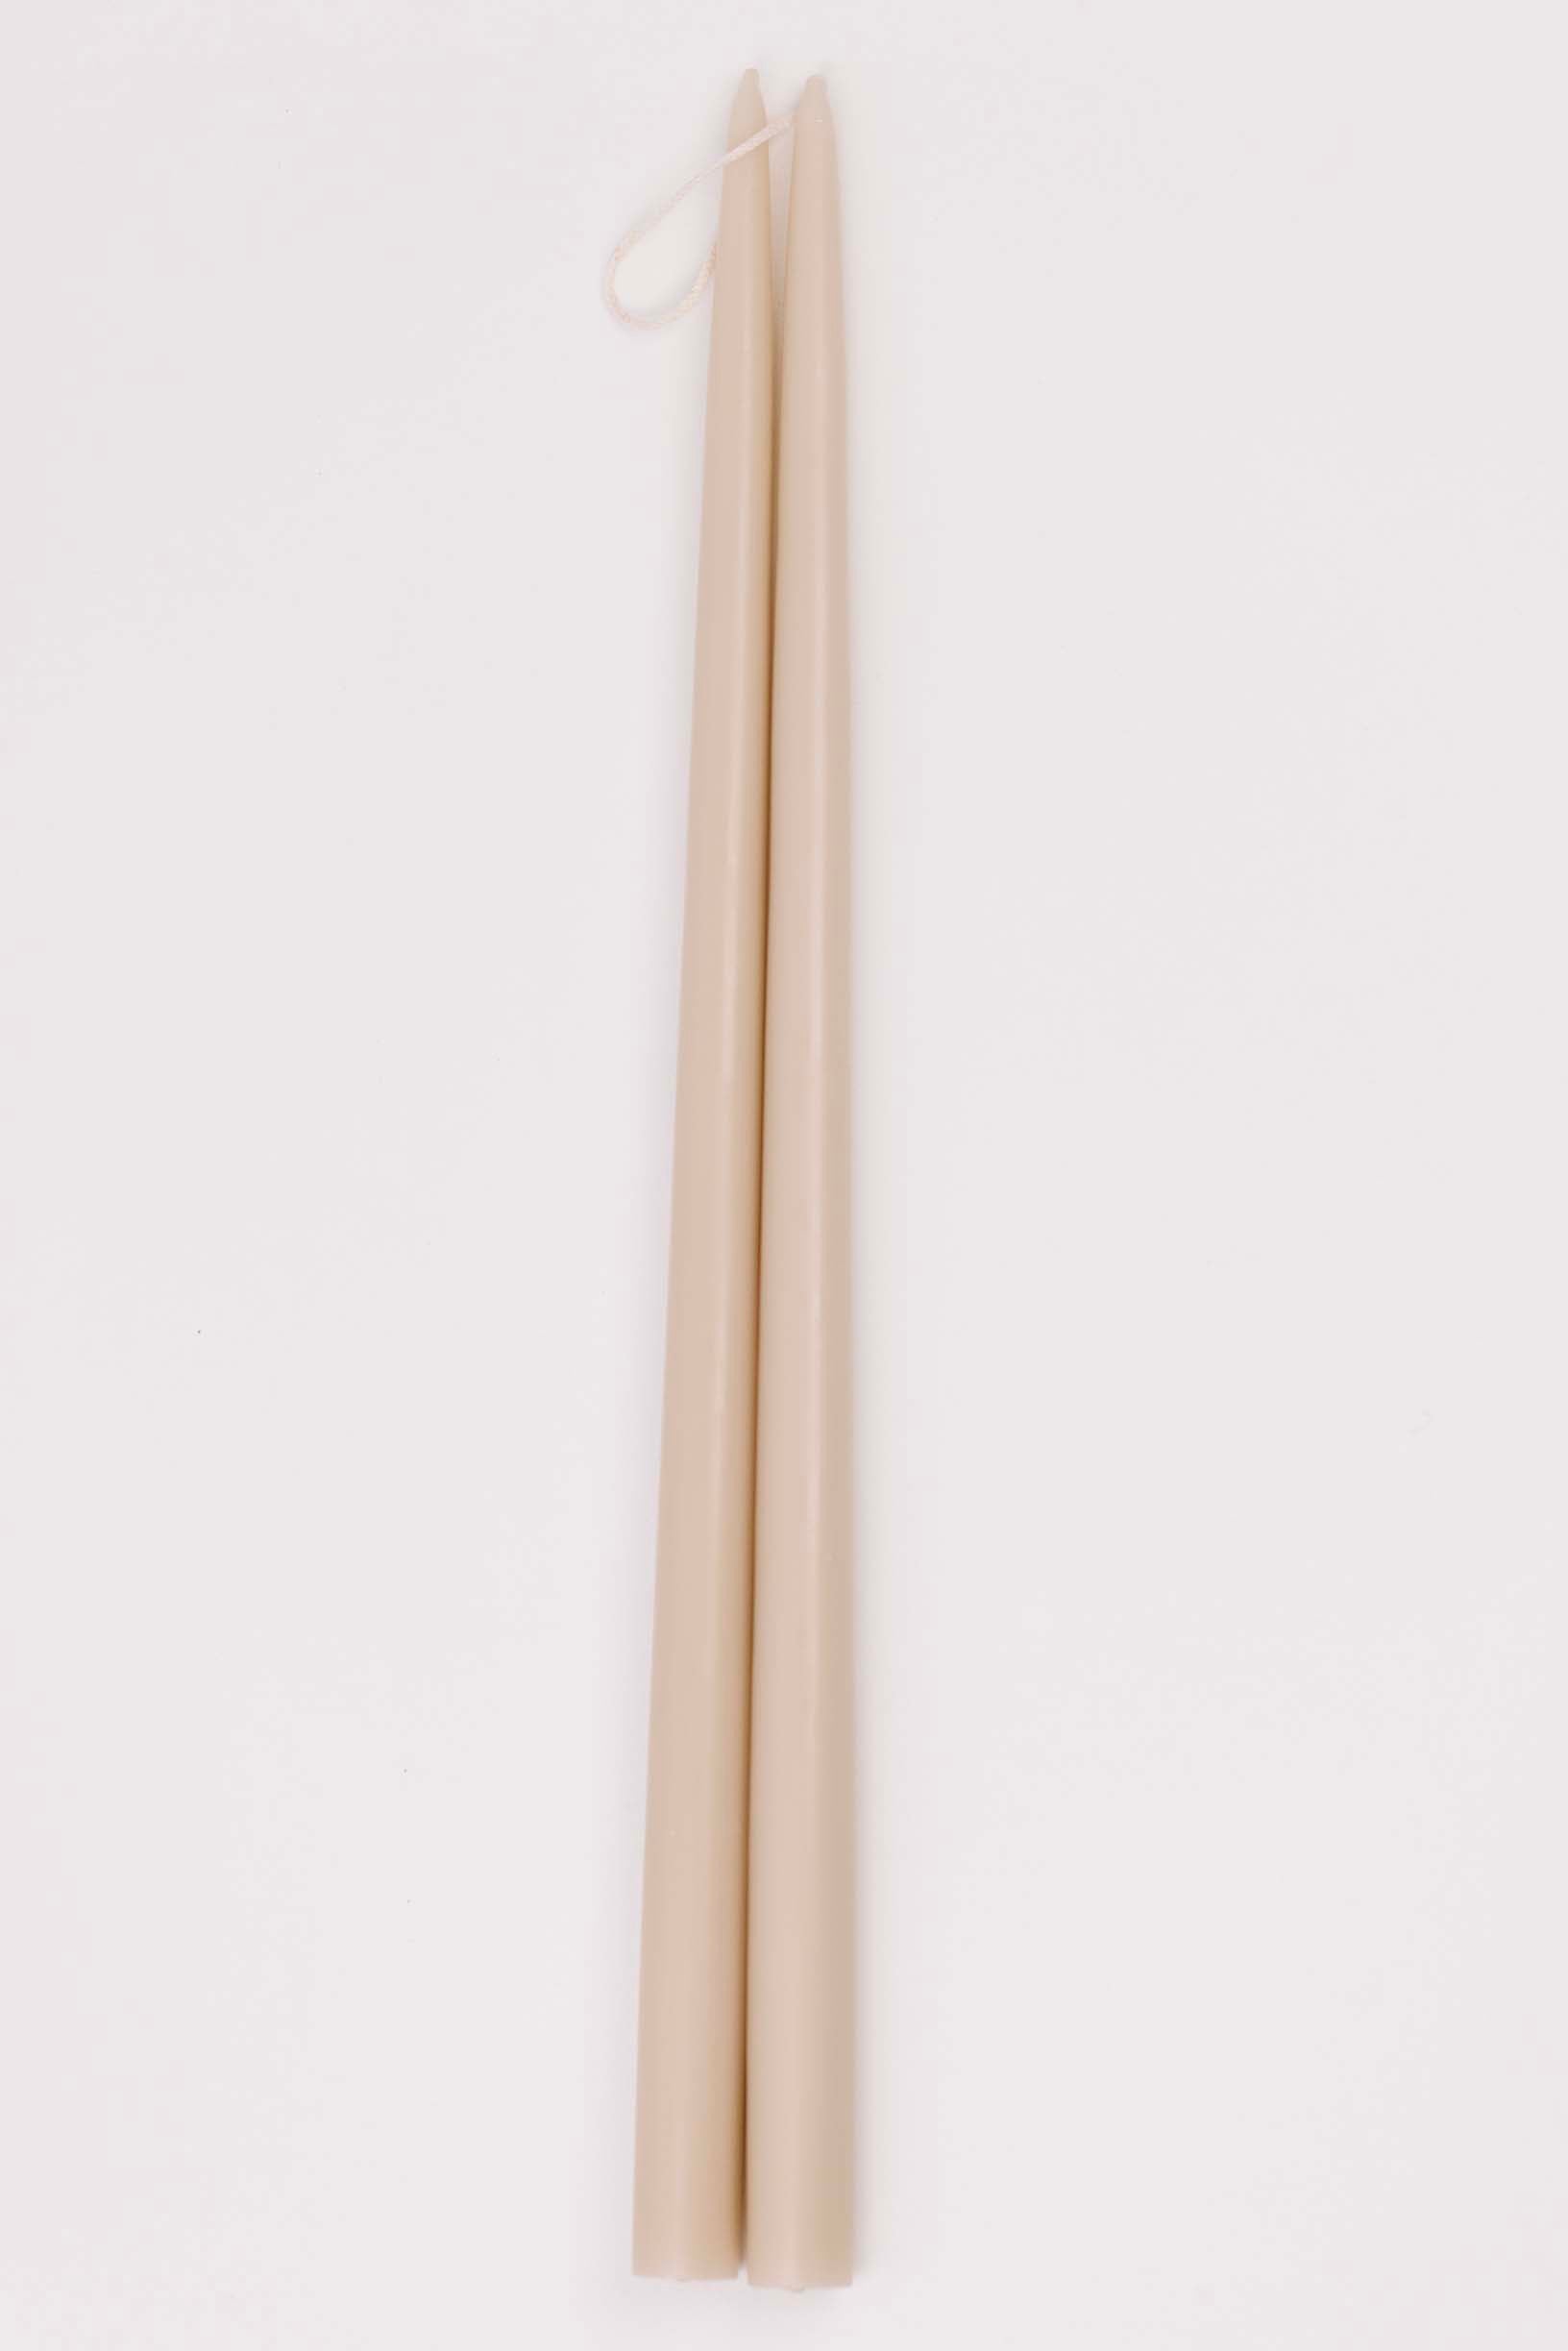 Ivory Taper Candles - 2 Sizes